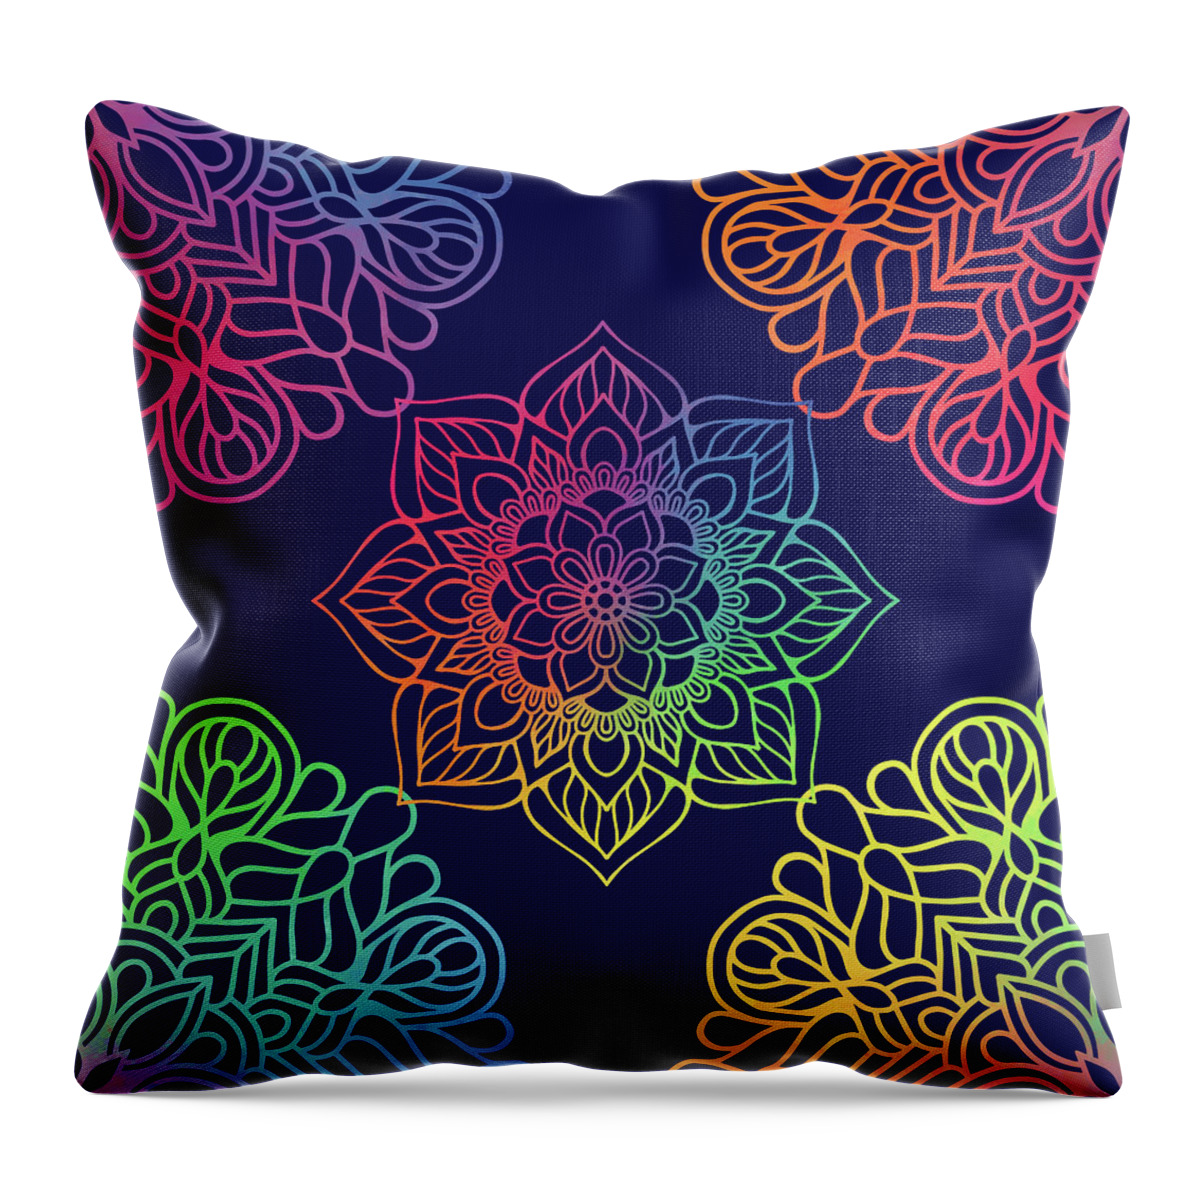 Mandala Throw Pillow featuring the digital art Colorful Mandala Pattern In Blue Background by Sambel Pedes